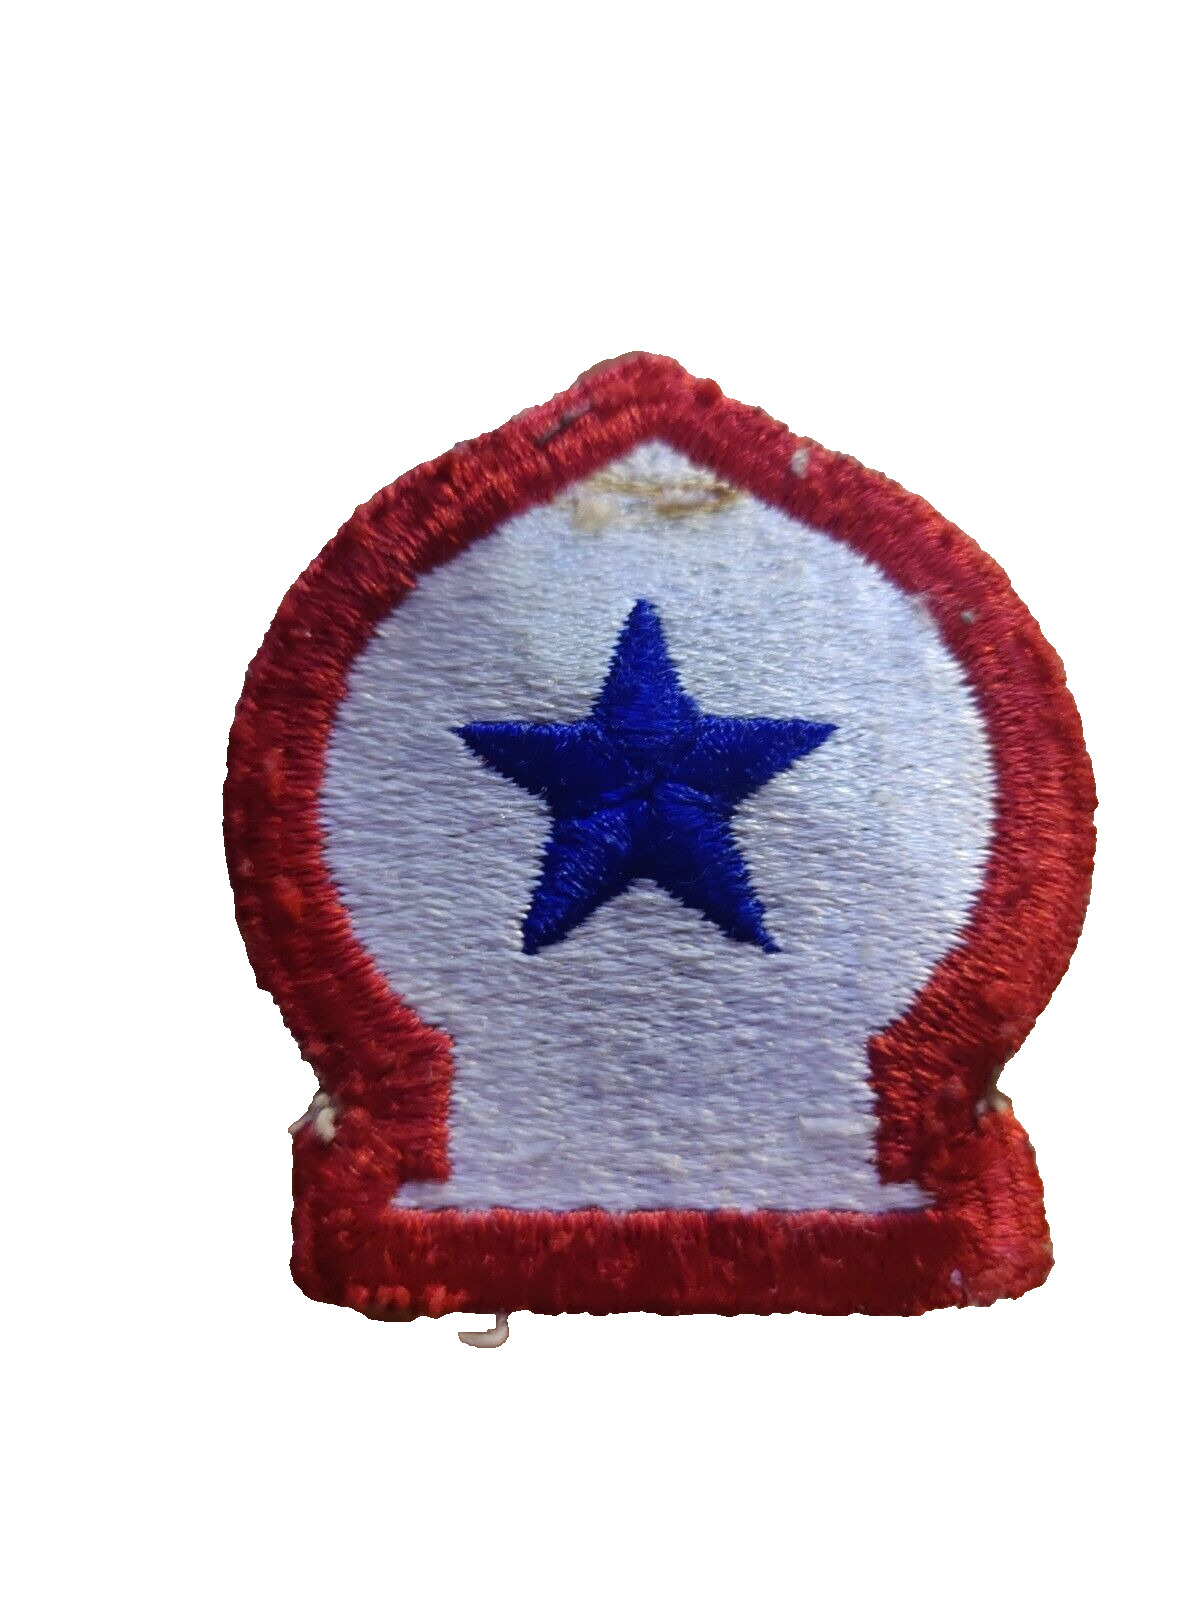 North Africa Theatre Vintage U.S. Army Shoulder Patch Insignia